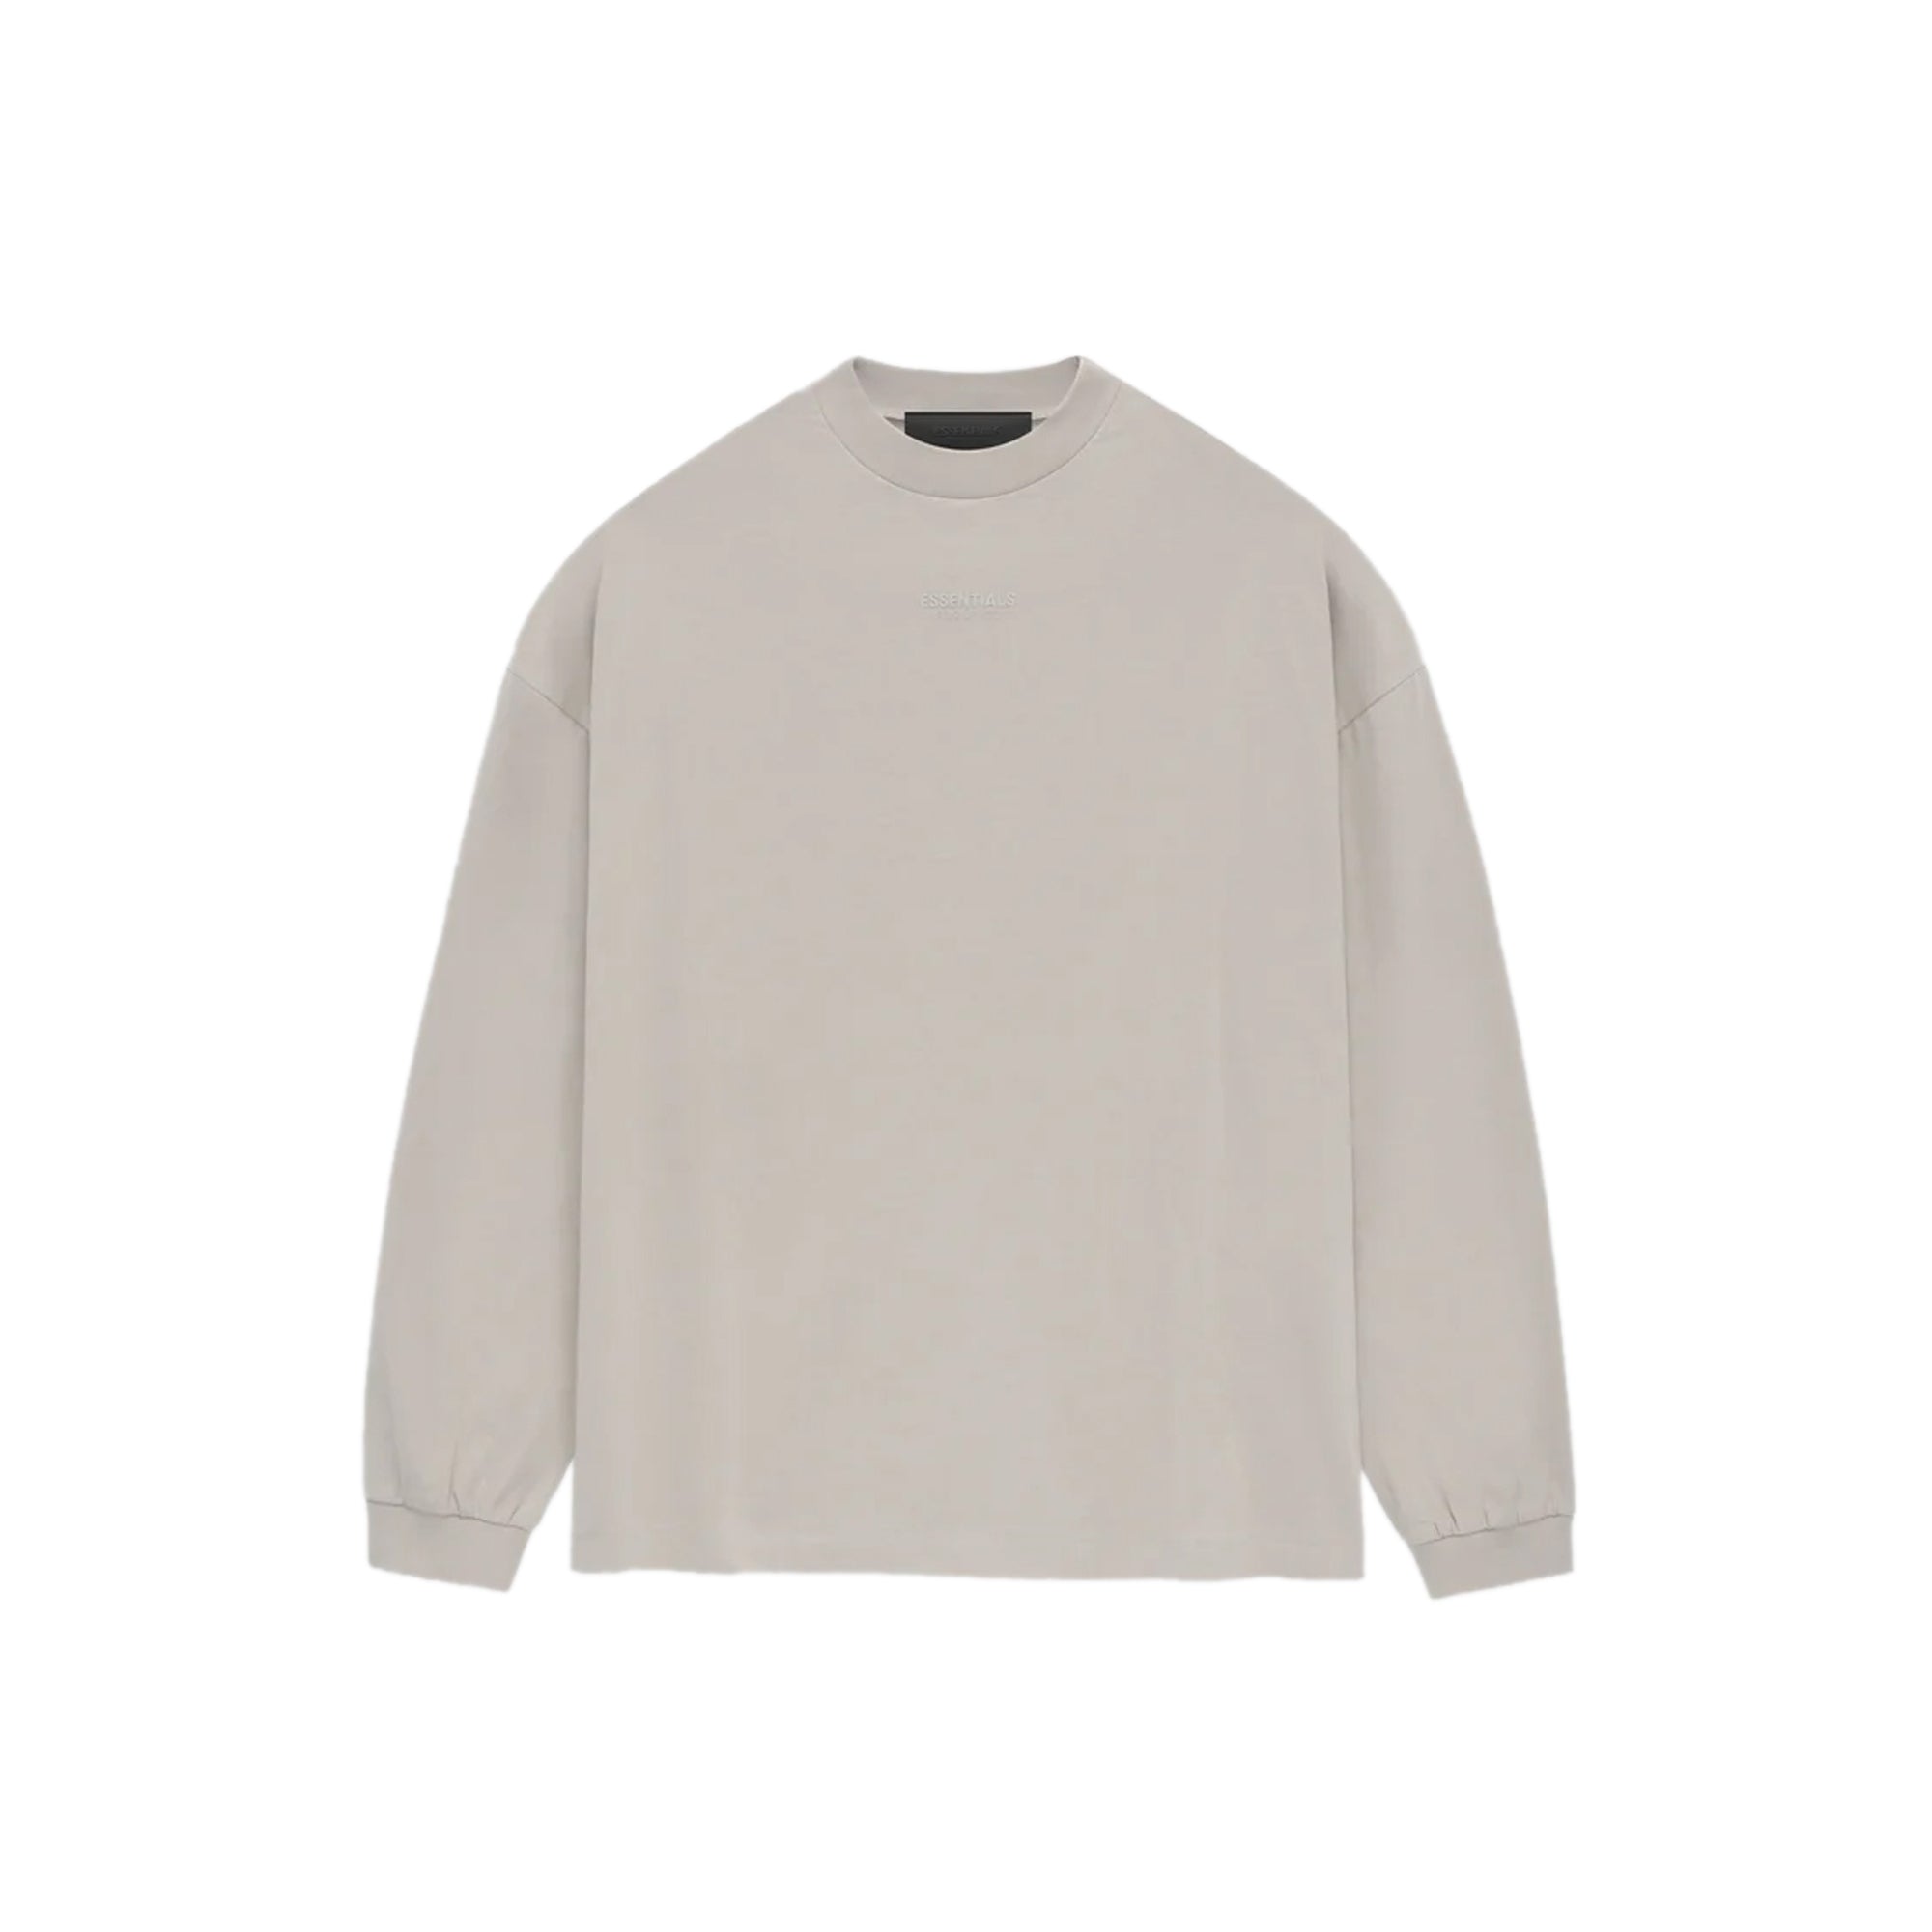 Fear of God Essentials LS White Tee card image